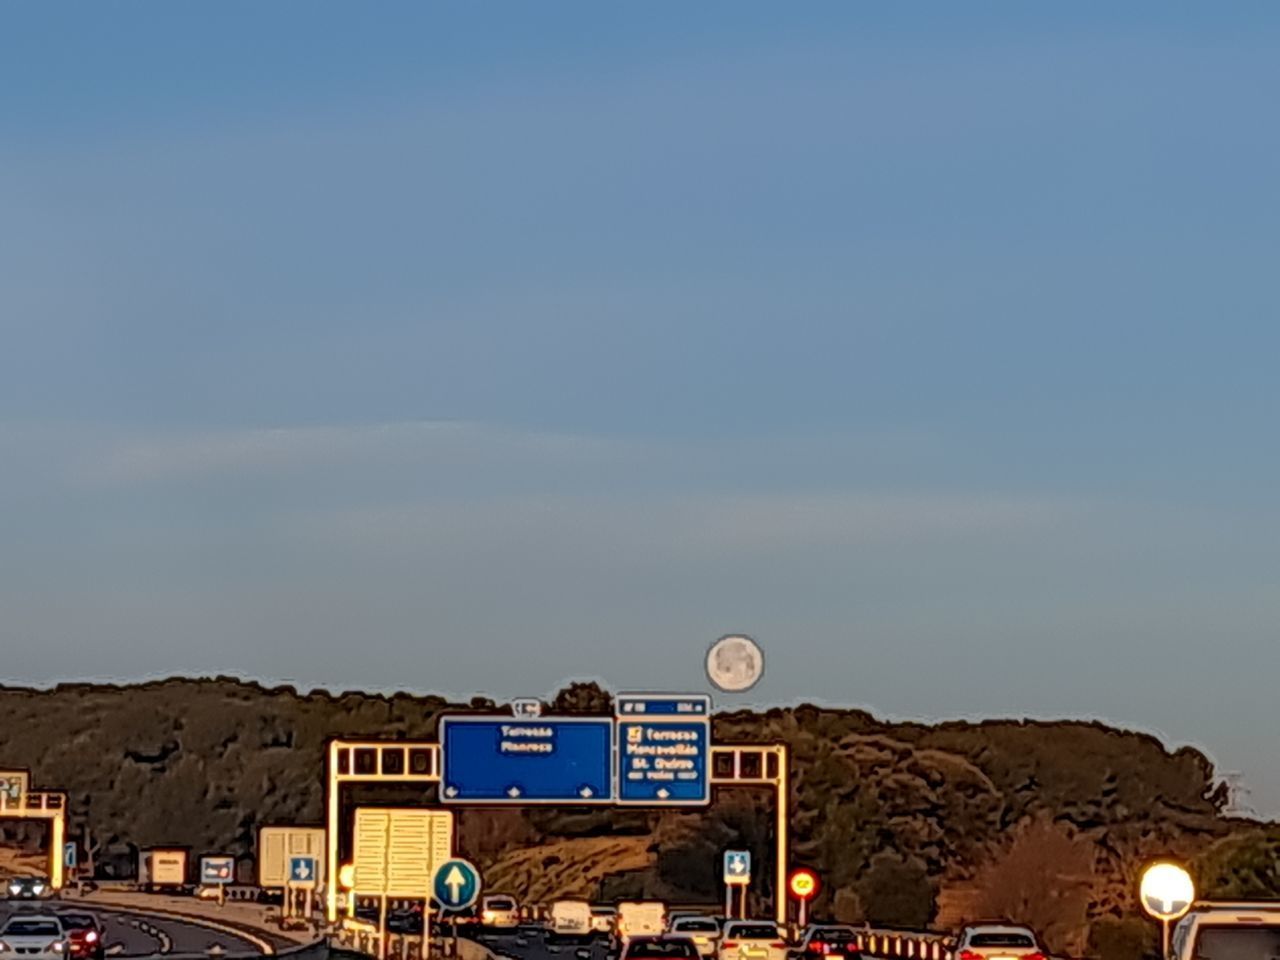 VIEW OF SIGN AGAINST SKY